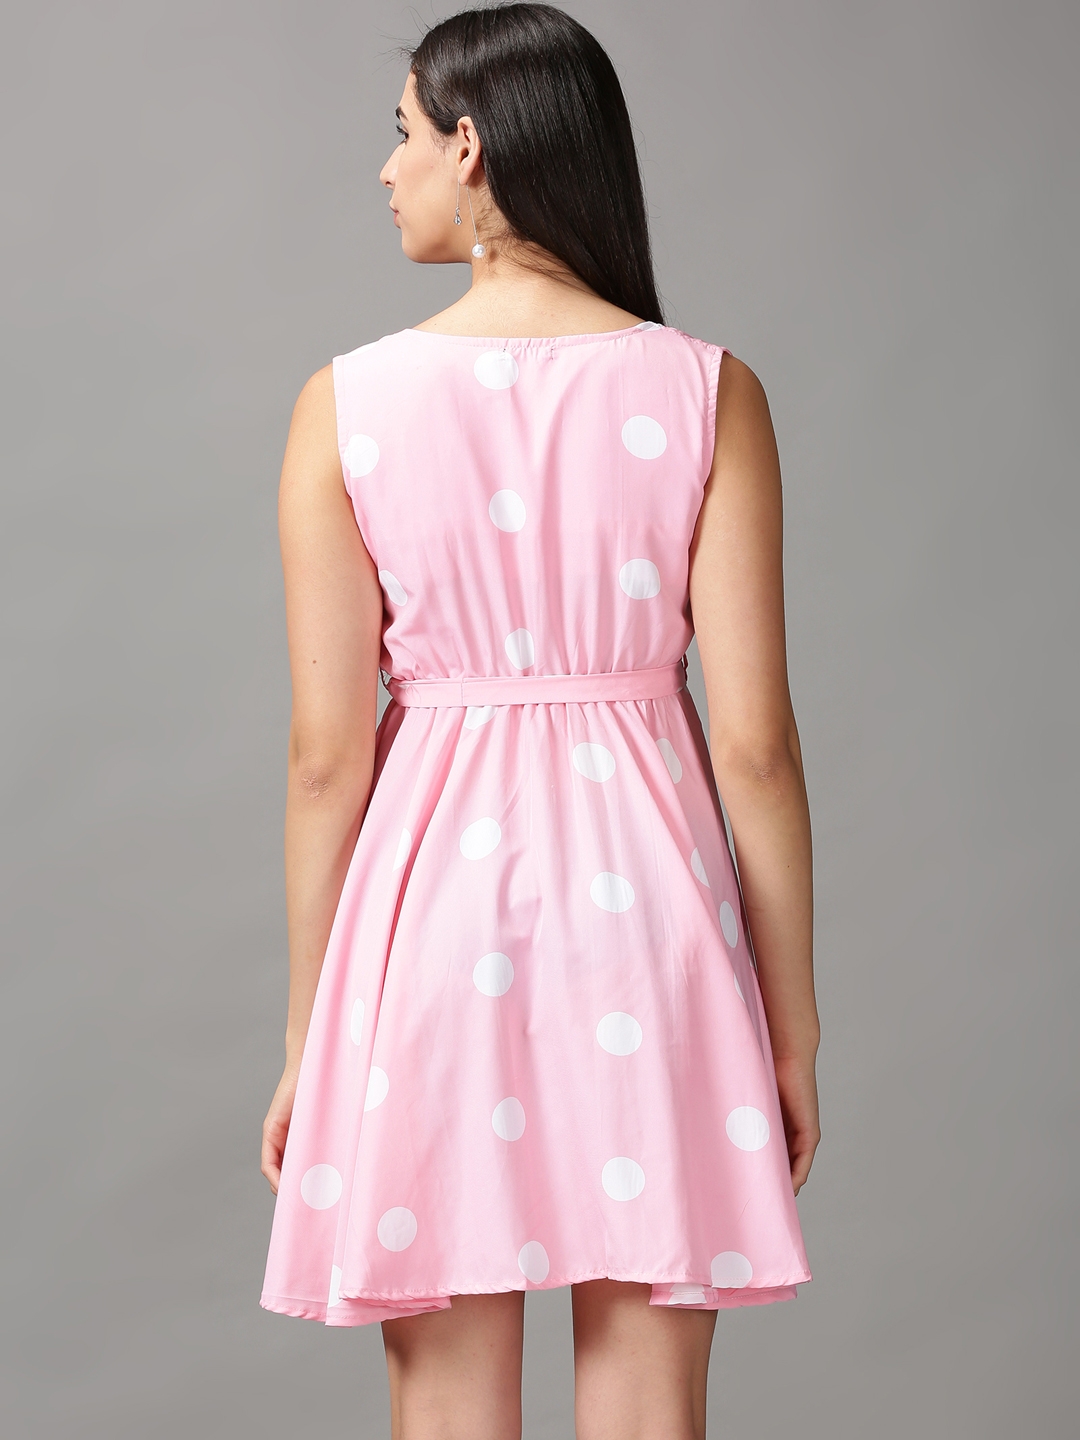 Showoff | SHOWOFF Women Pink Printed V Neck Sleeveless Above Knee Fit and Flare Dress 3